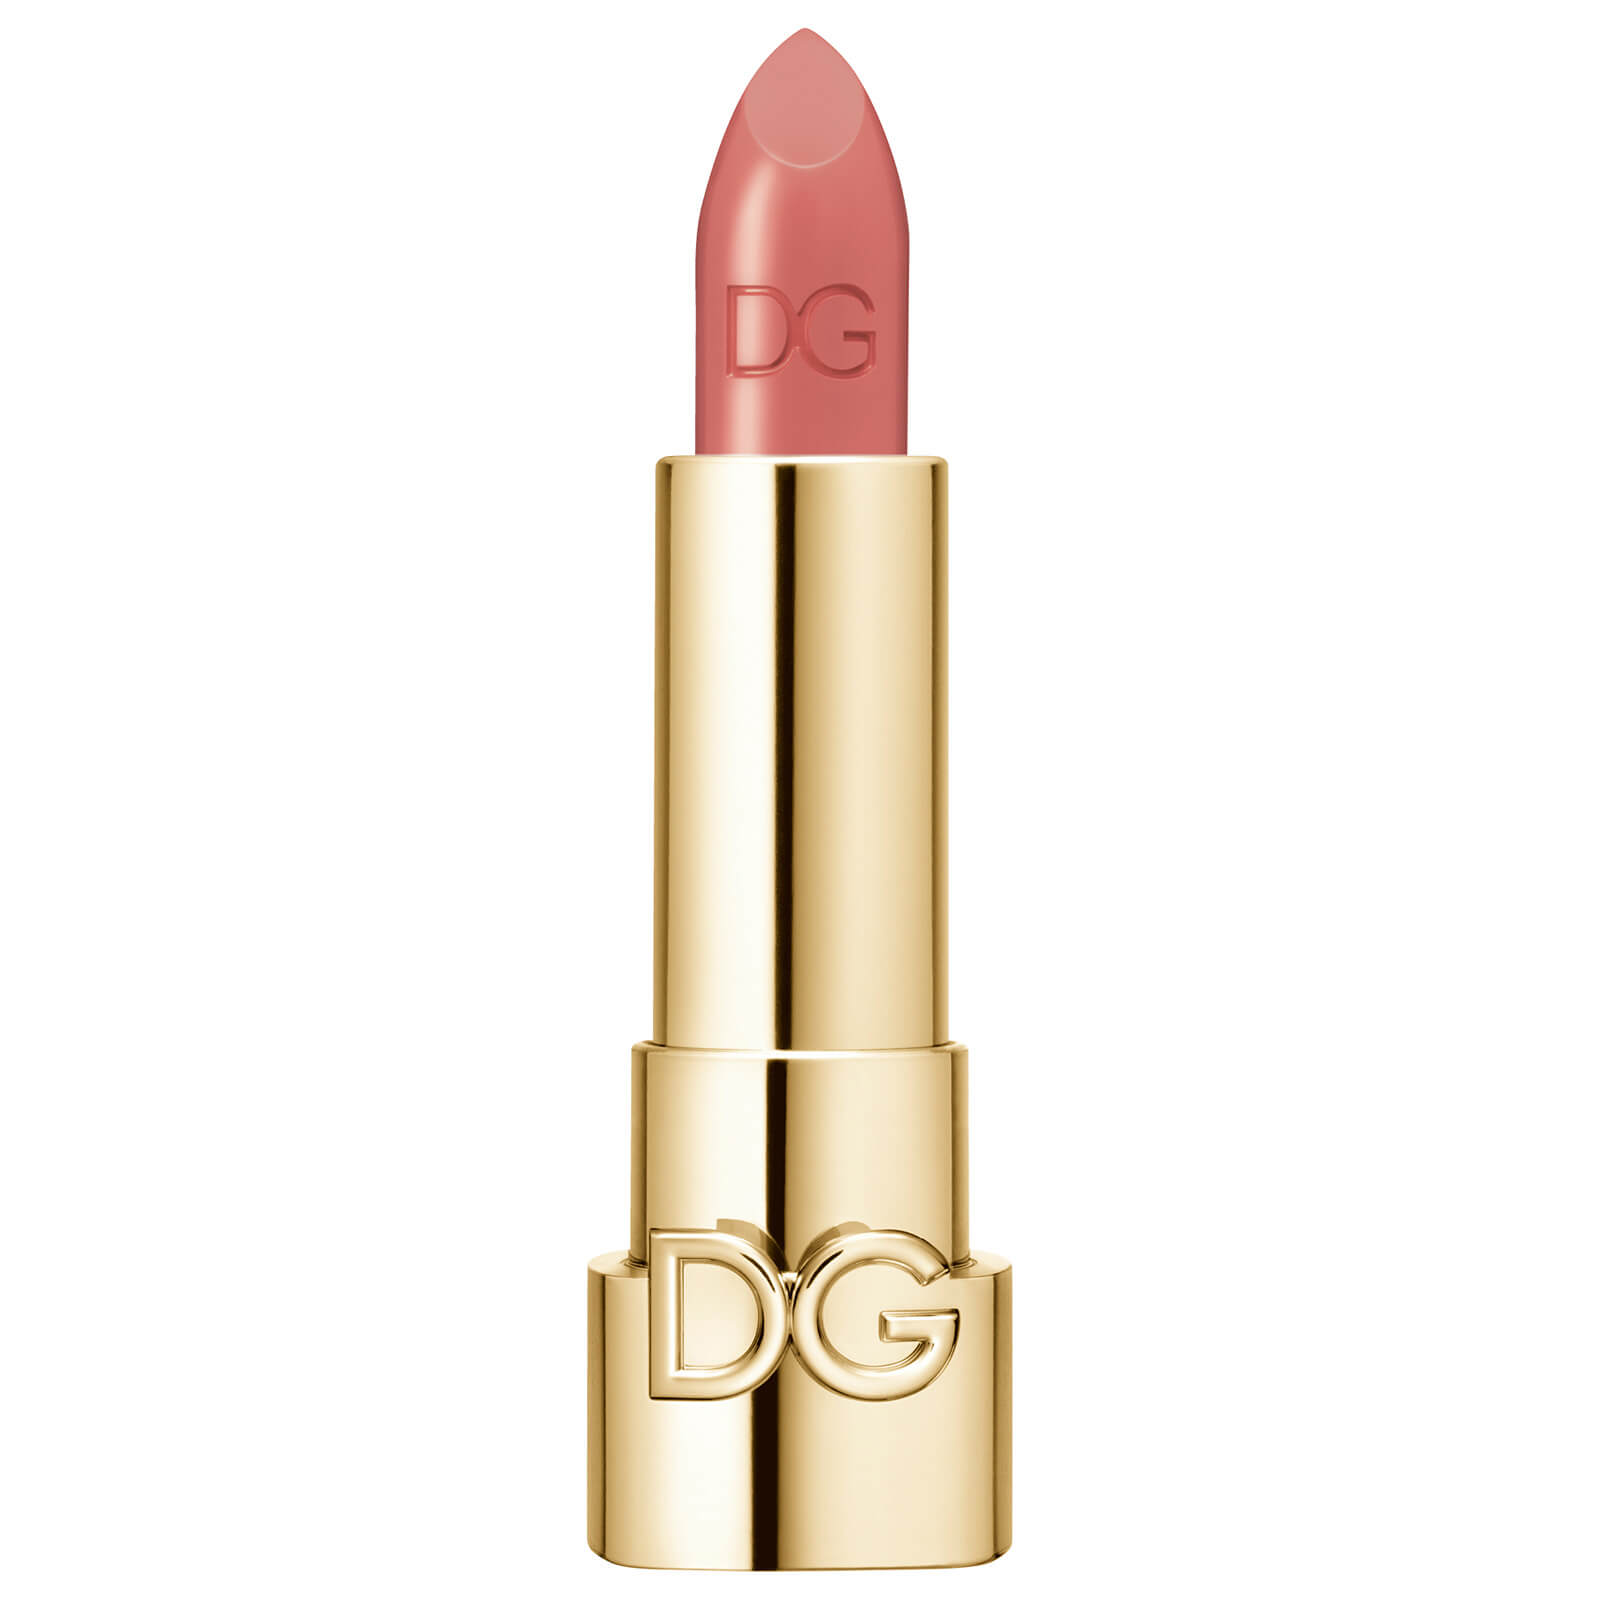 Image of Dolce&Gabbana The Only One Lipstick 1.7g (No Cap) (Various Shades) - 130 Sweet Honey